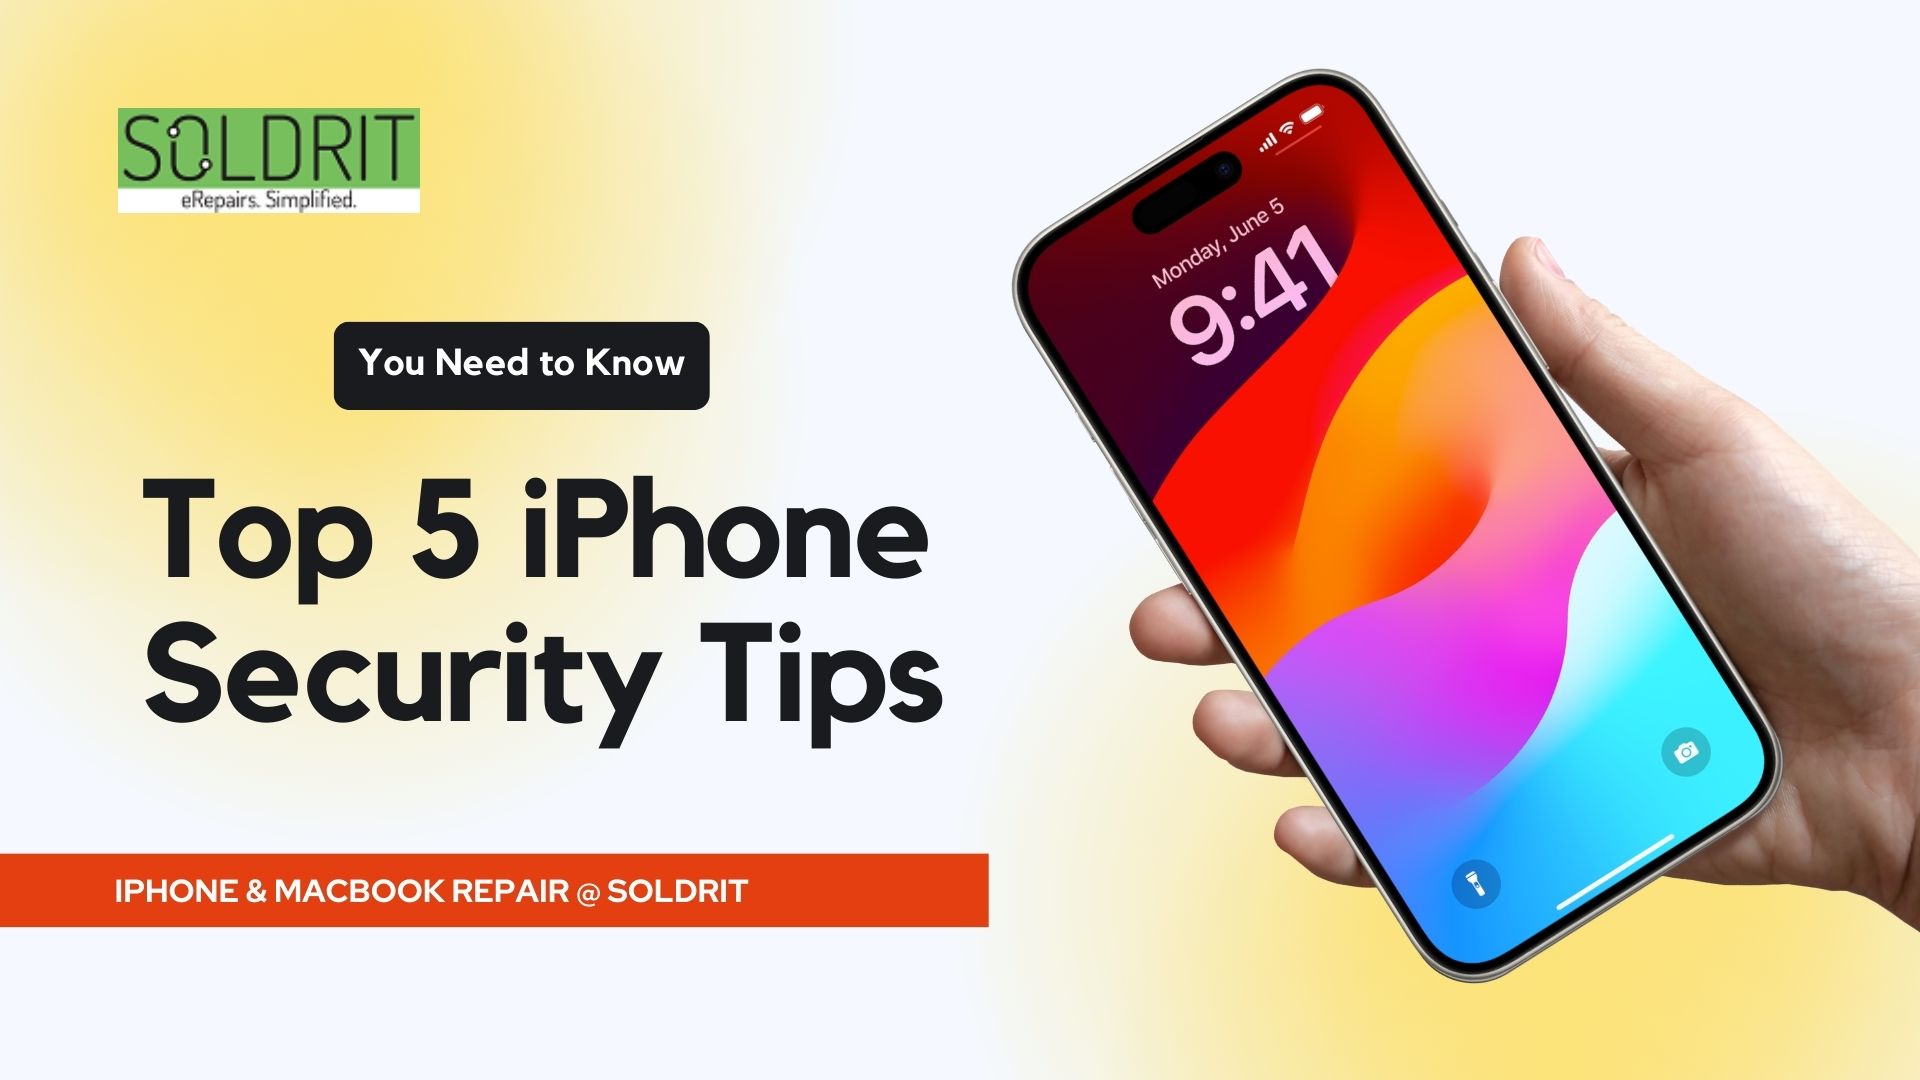 Top 5 iPhone Security Tips You Need to Know